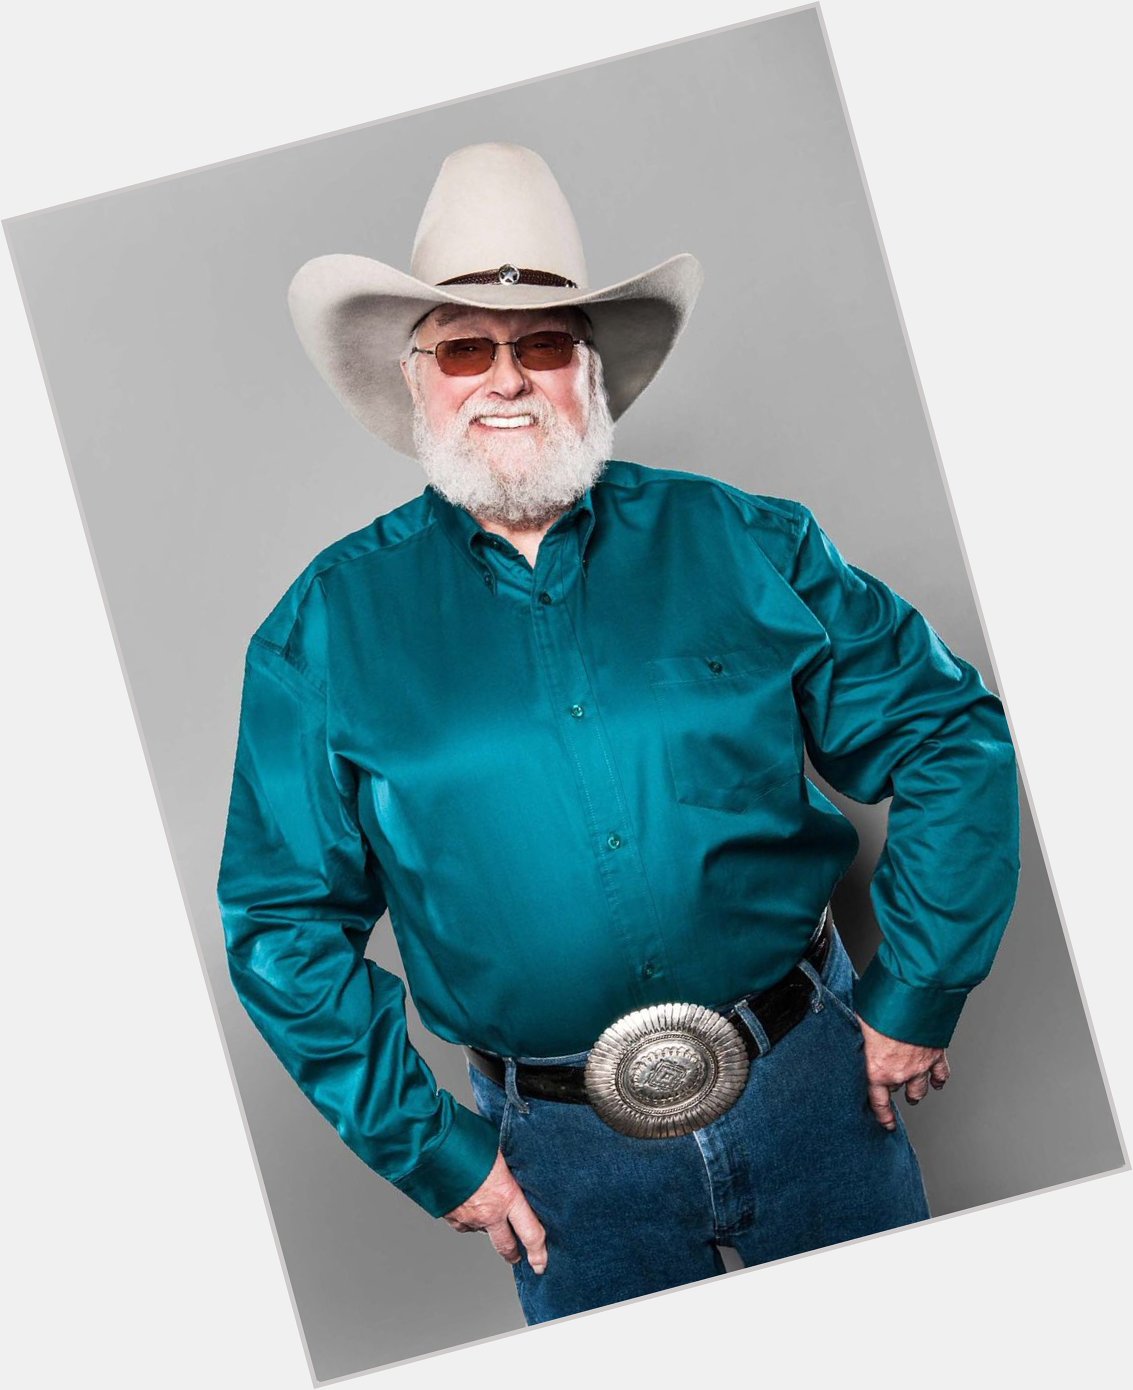 Happy Birthday for this weekend to Charlie Daniels, born Oct 28th 1936 